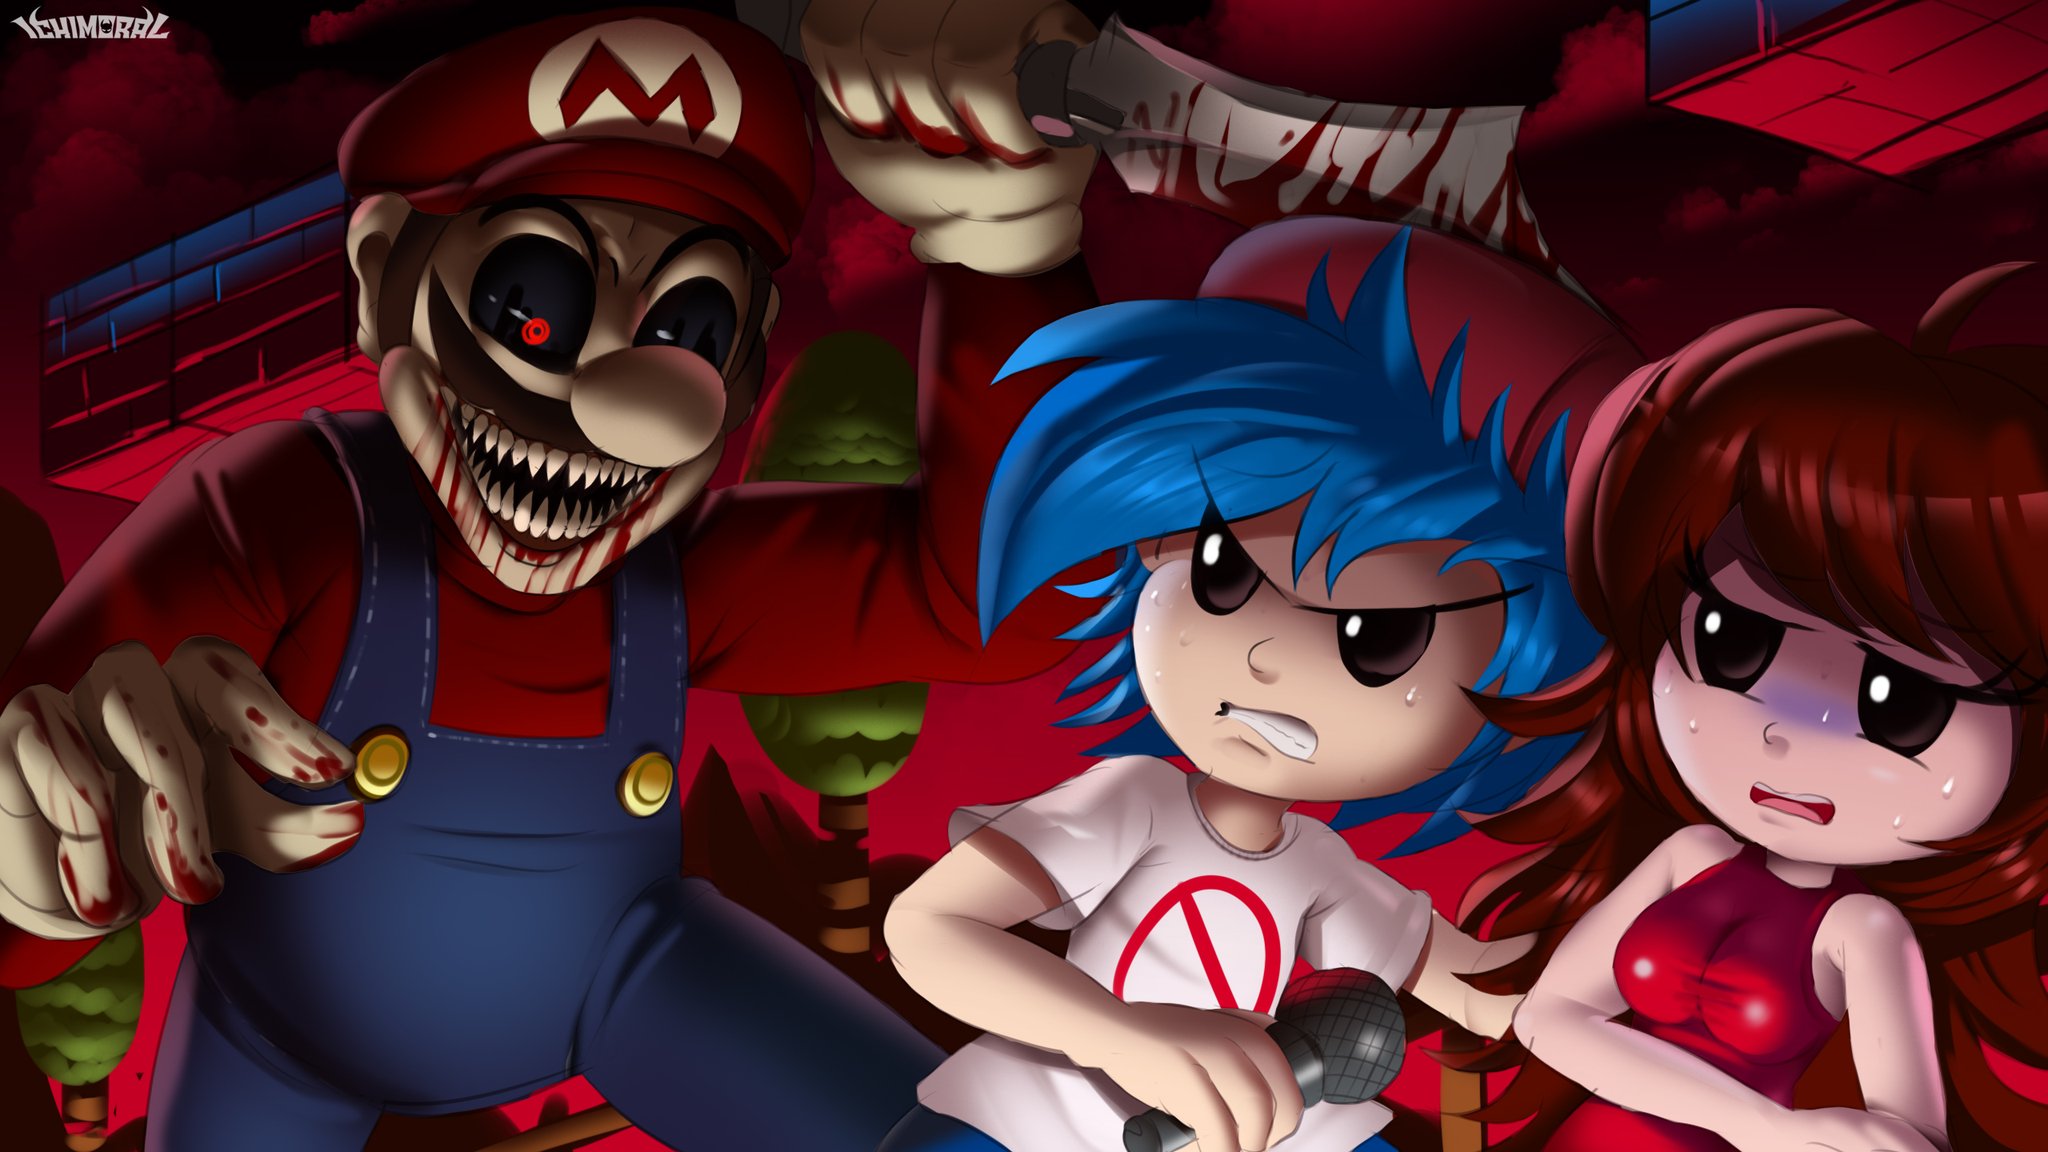 Friday Night Funkin vs Sonic.exe - Lord X by Ichimoral on Newgrounds